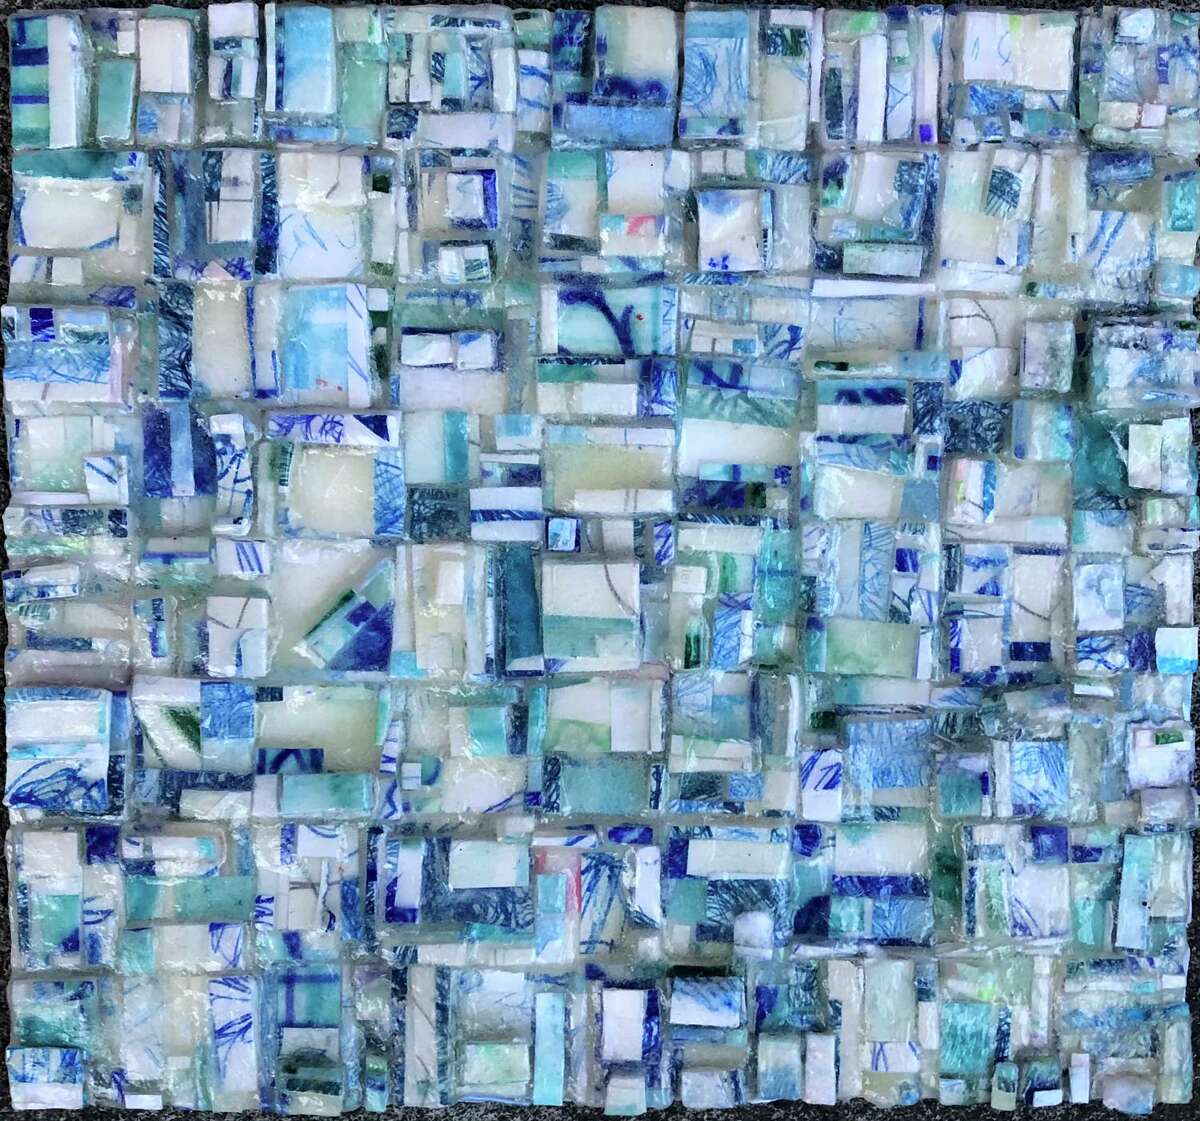 The public is invited to a reception at the Art/Place Gallery in Fairfield from 2 to 5 p.m. on Sunday, Feb. 6, for an “Assemblage,” art show. One of the three new members, Lynne Arovas, of the gallery, and who is displaying artwork in the show, has a piece of artwork that is titled: “Blue Glass,” and that is shown.